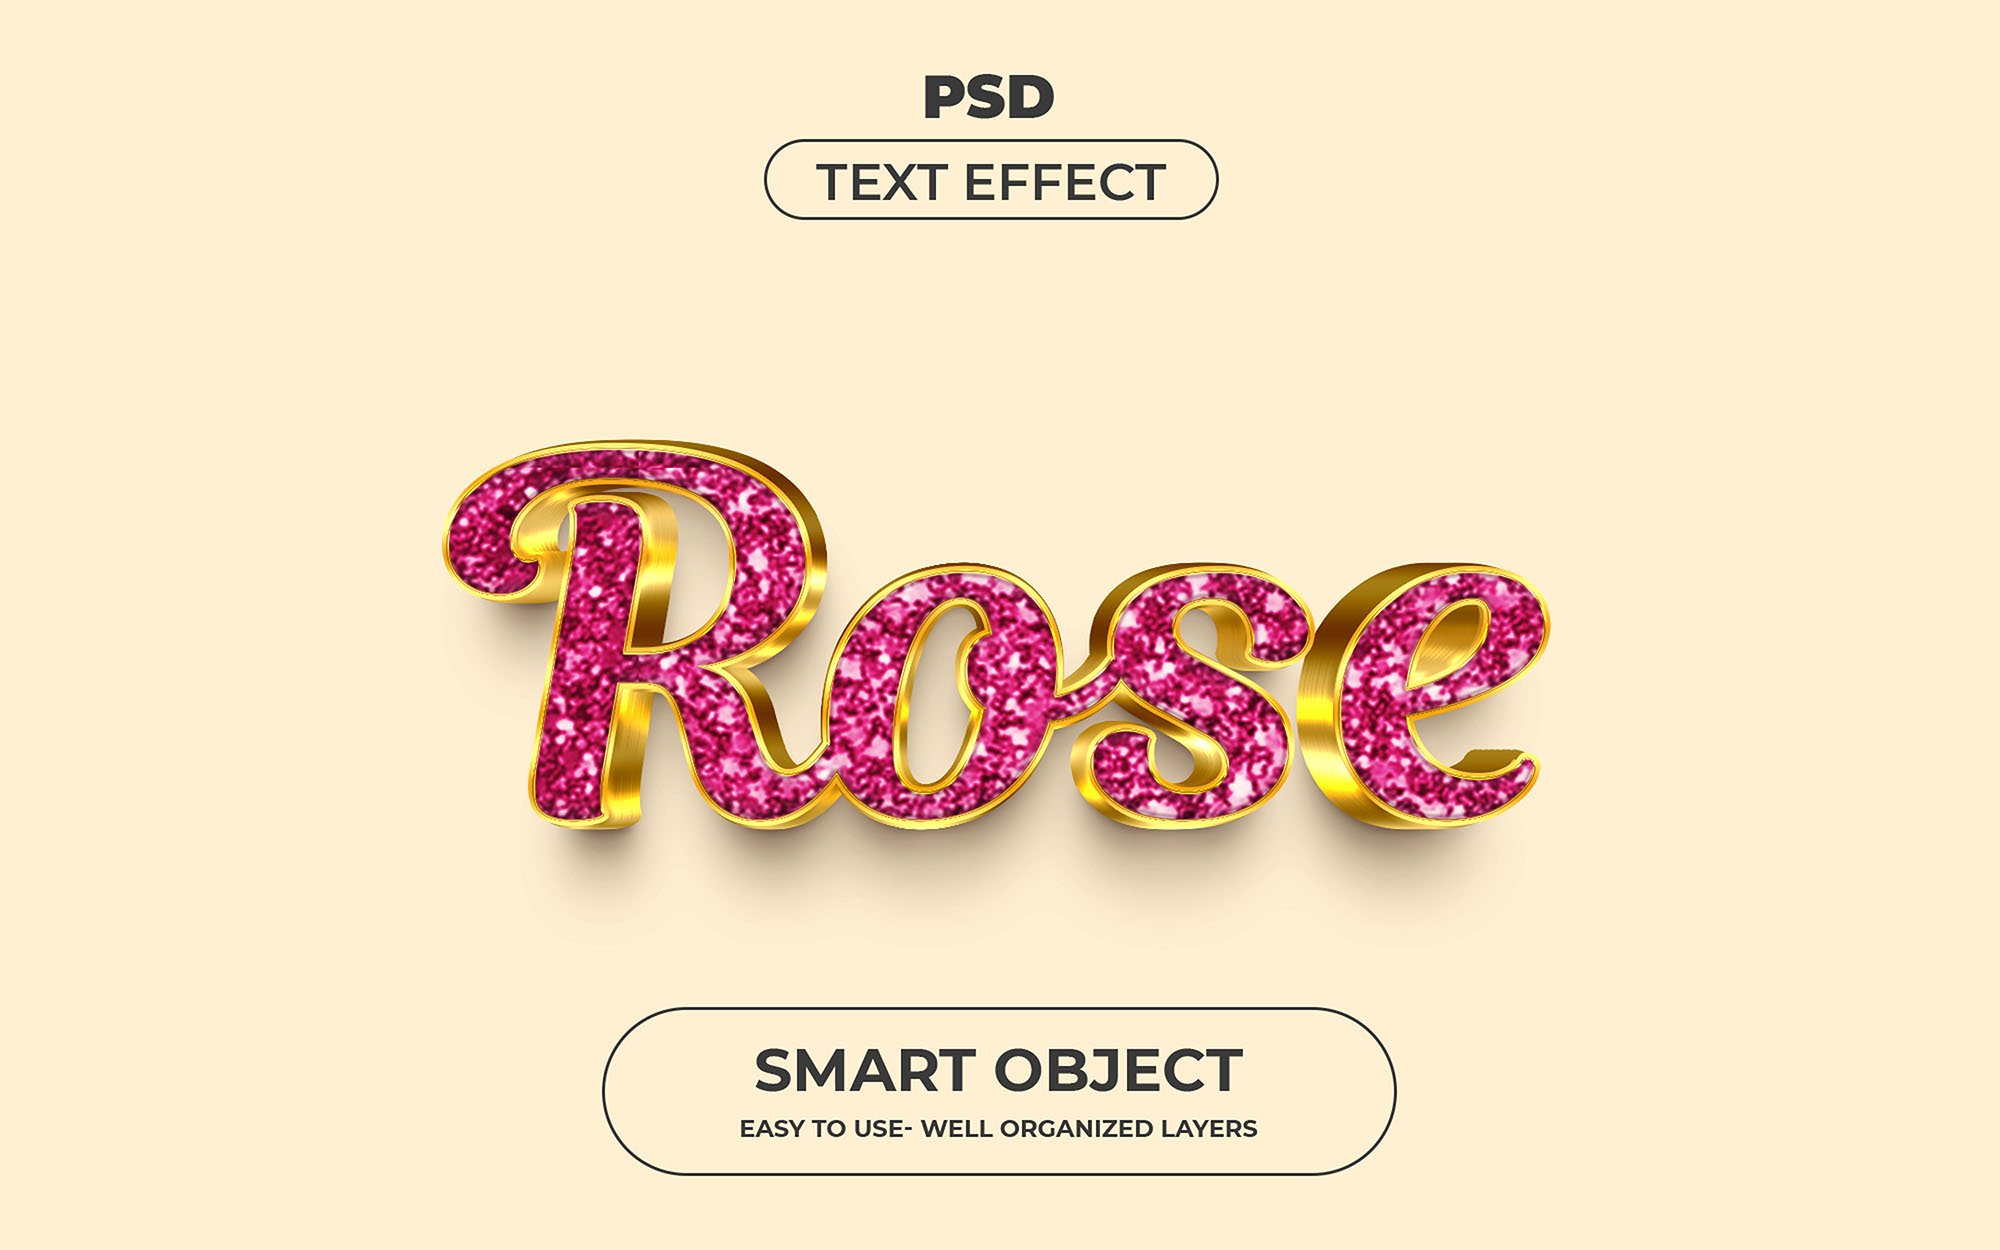 Rose 3D Editable psd Text Effectcover image.